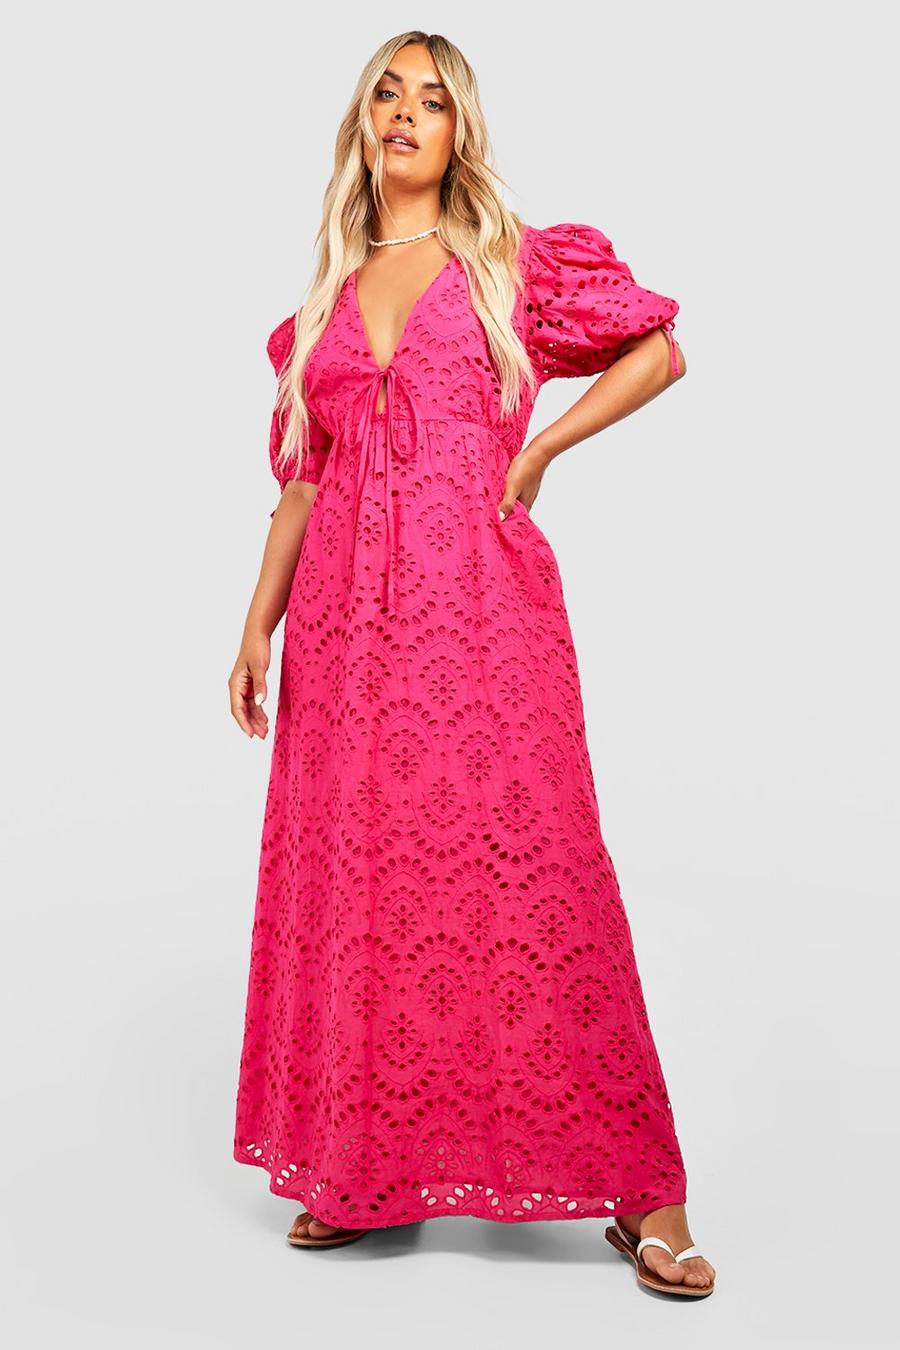 Grande taille - Robe longue nouée en broderie anglaise, Hot pink